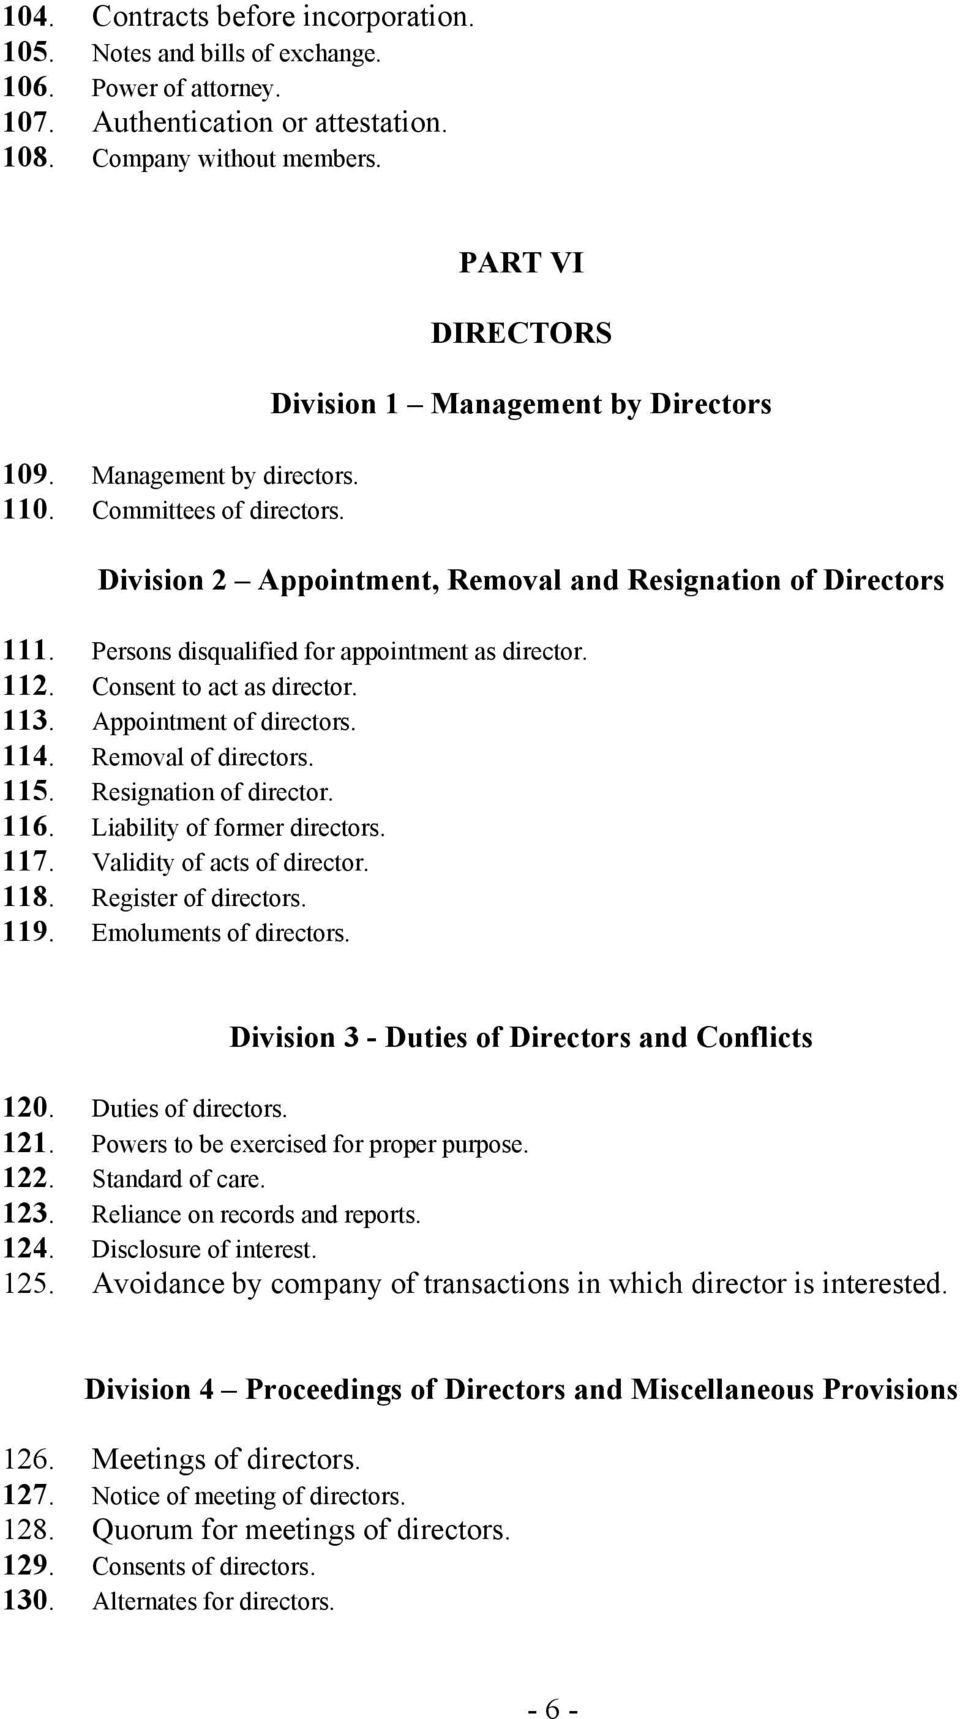 Consent to act as director. 113. Appointment of directors. 114. Removal of directors. 115. Resignation of director. 116. Liability of former directors. 117. Validity of acts of director. 118.